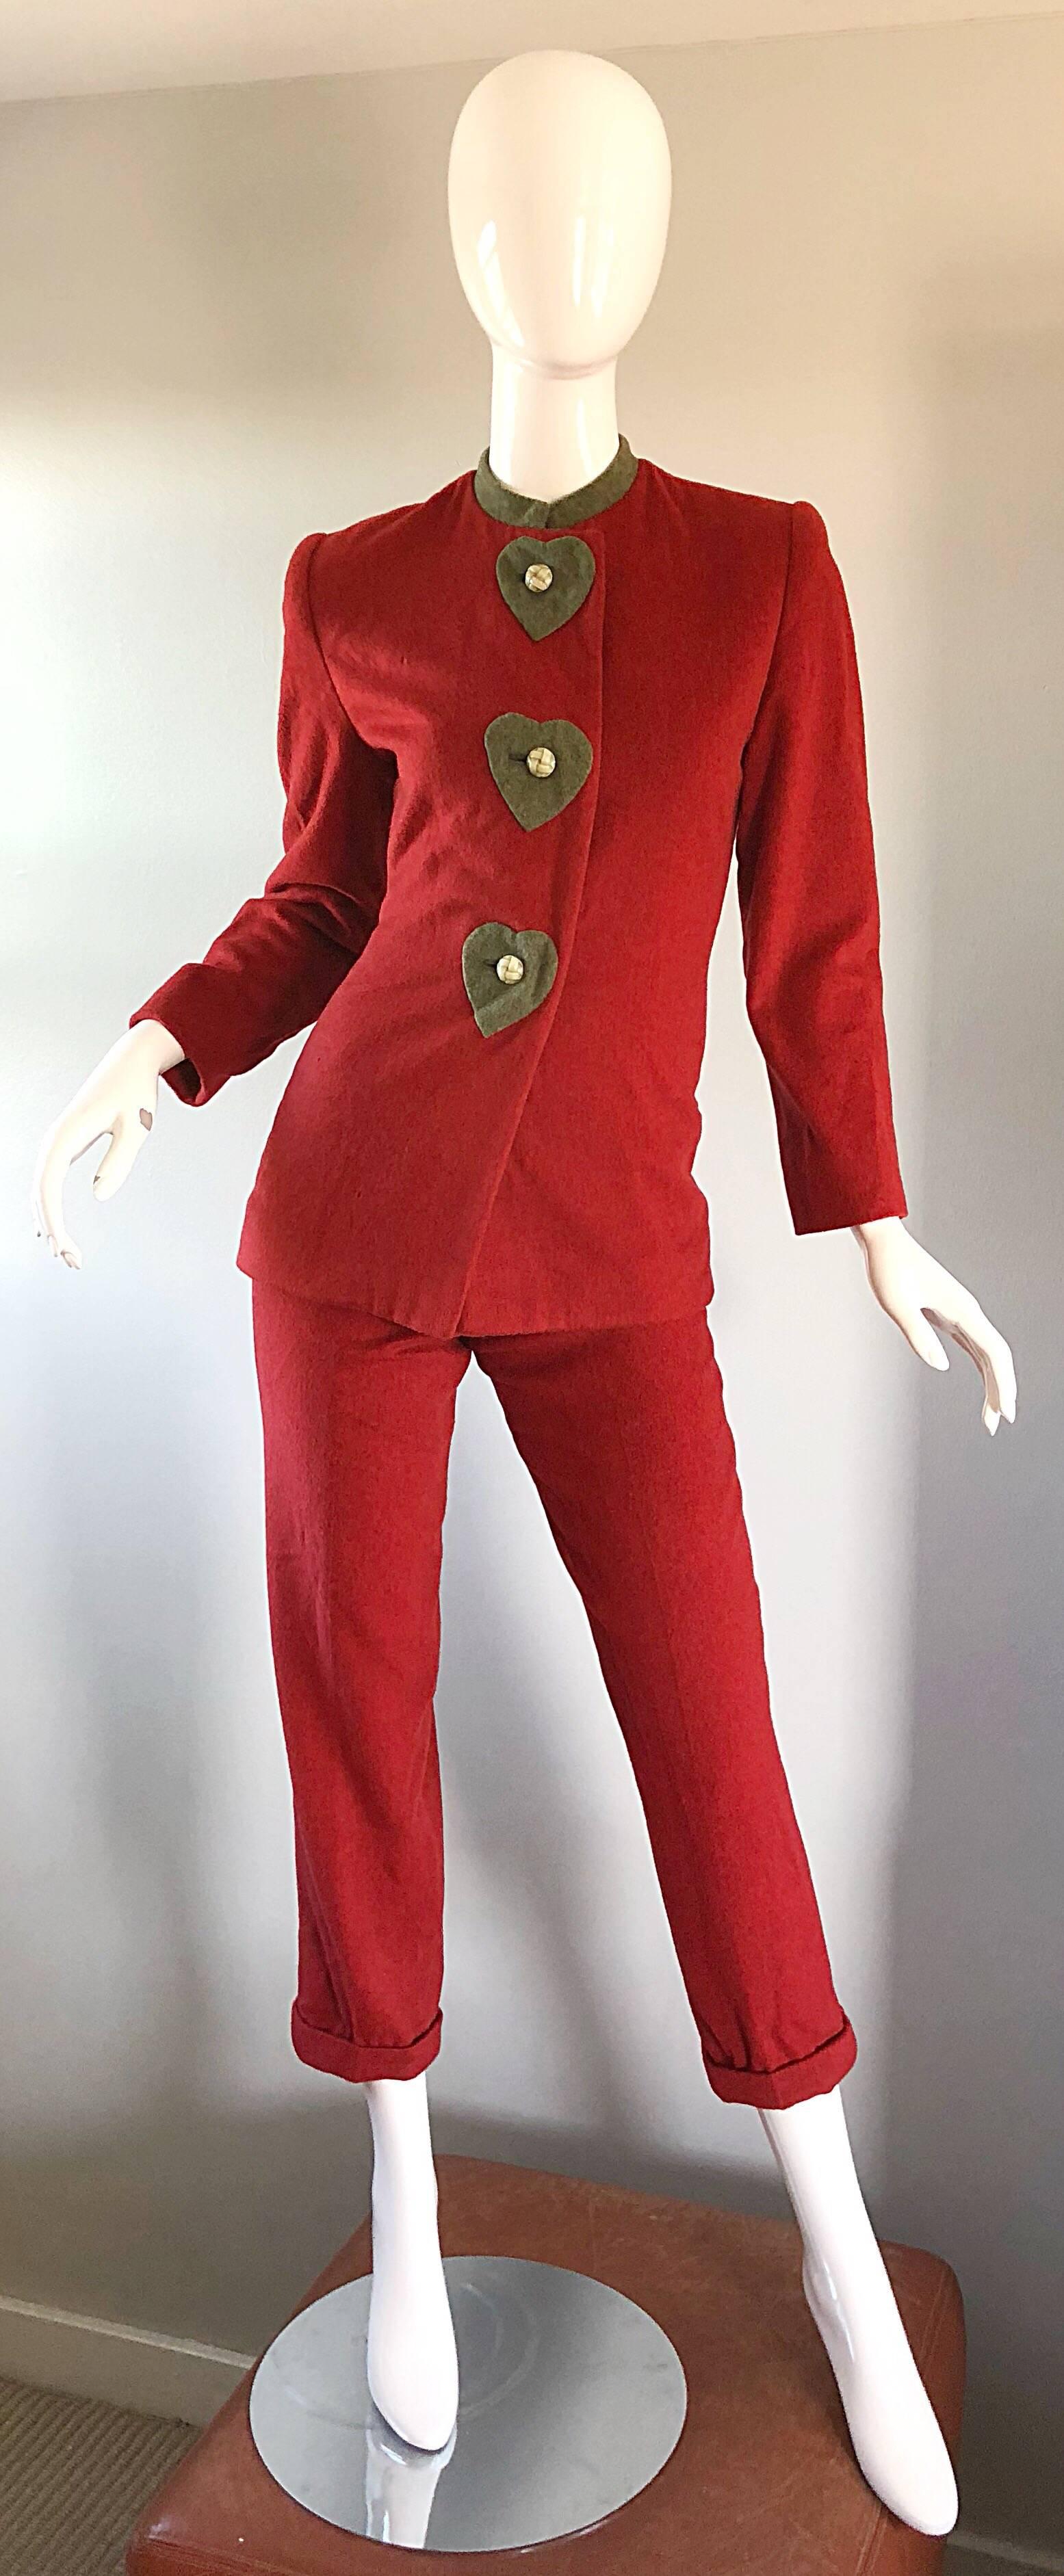 Carolina Herrera Rare Early 1990s Size 6 Brick Red Novelty Heart Print Pant Suit For Sale 2